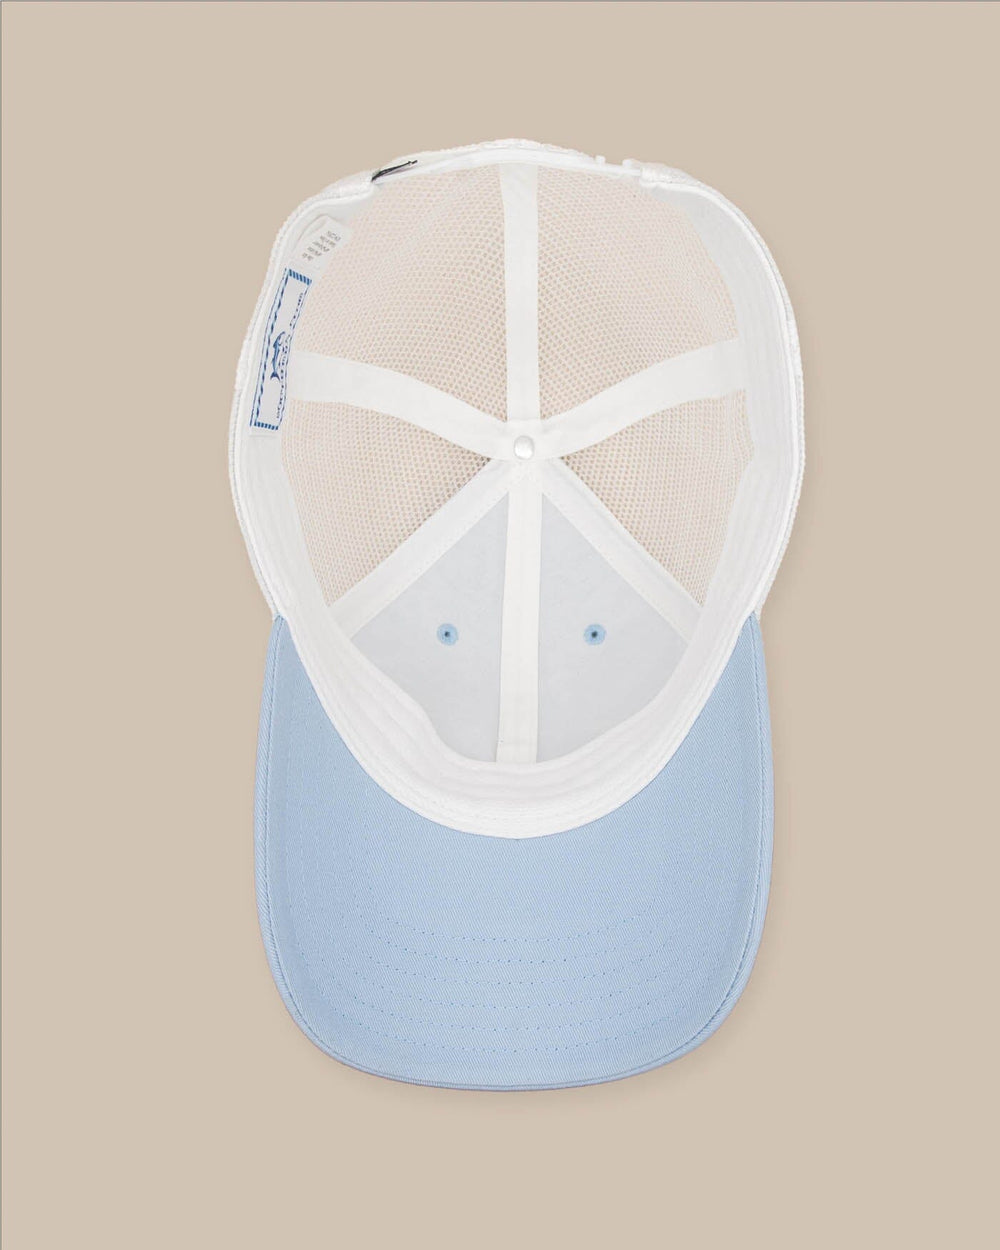 The detail view of the Southern Tide Shackleford Trucker Hat by Southern Tide - Light Blue